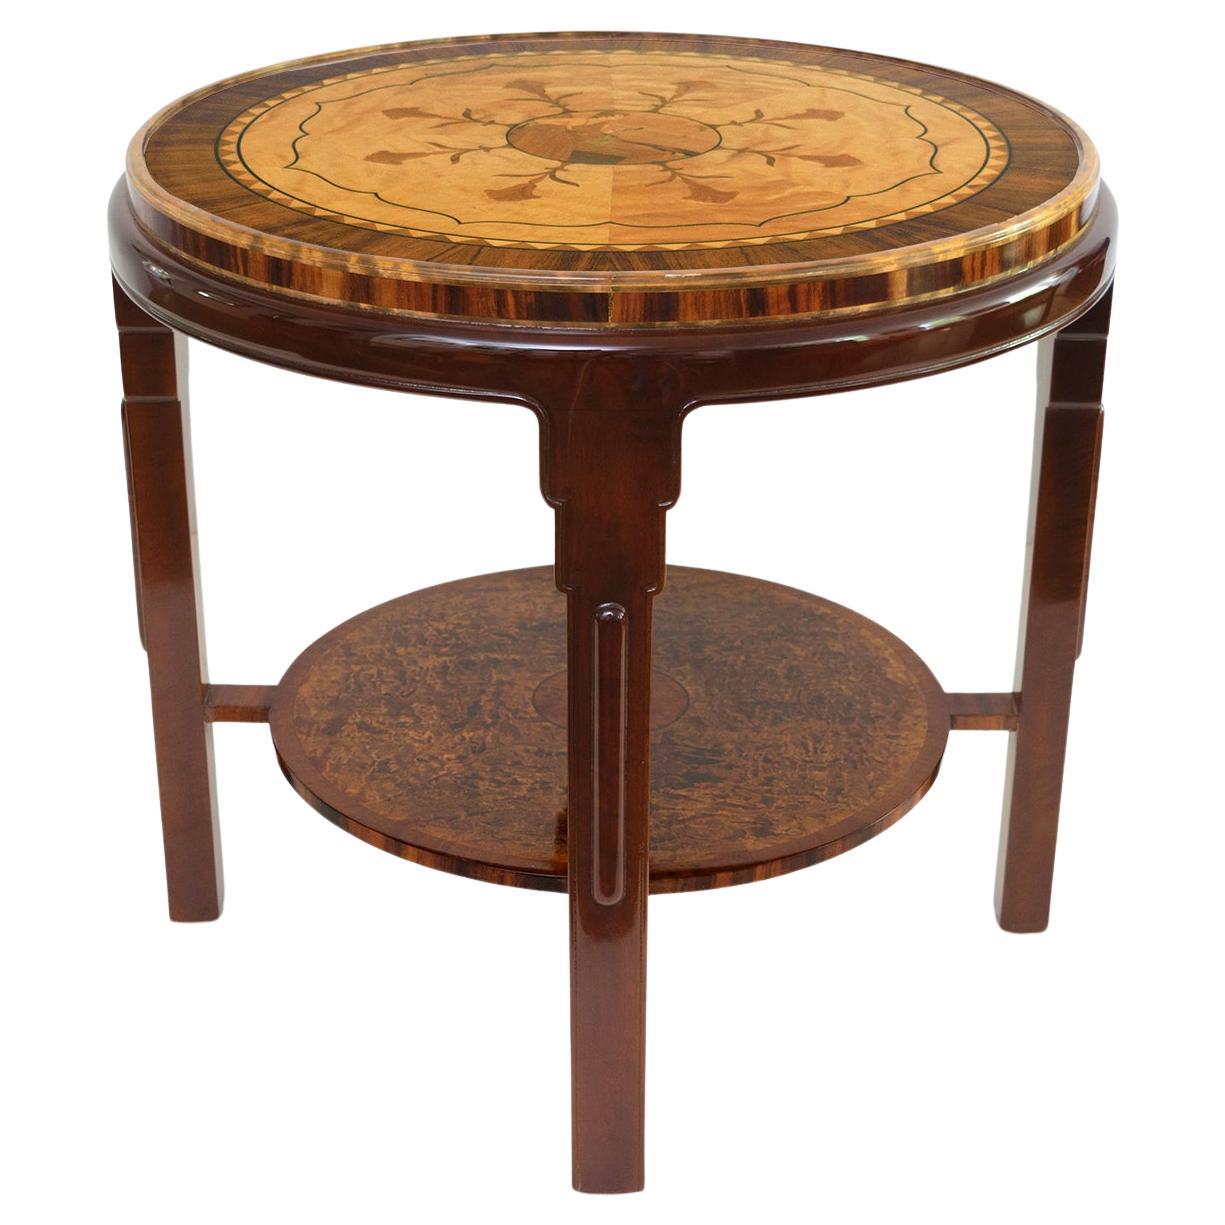 Swedish Grace side table lavishly decorated in a variety of marquetry 1920's